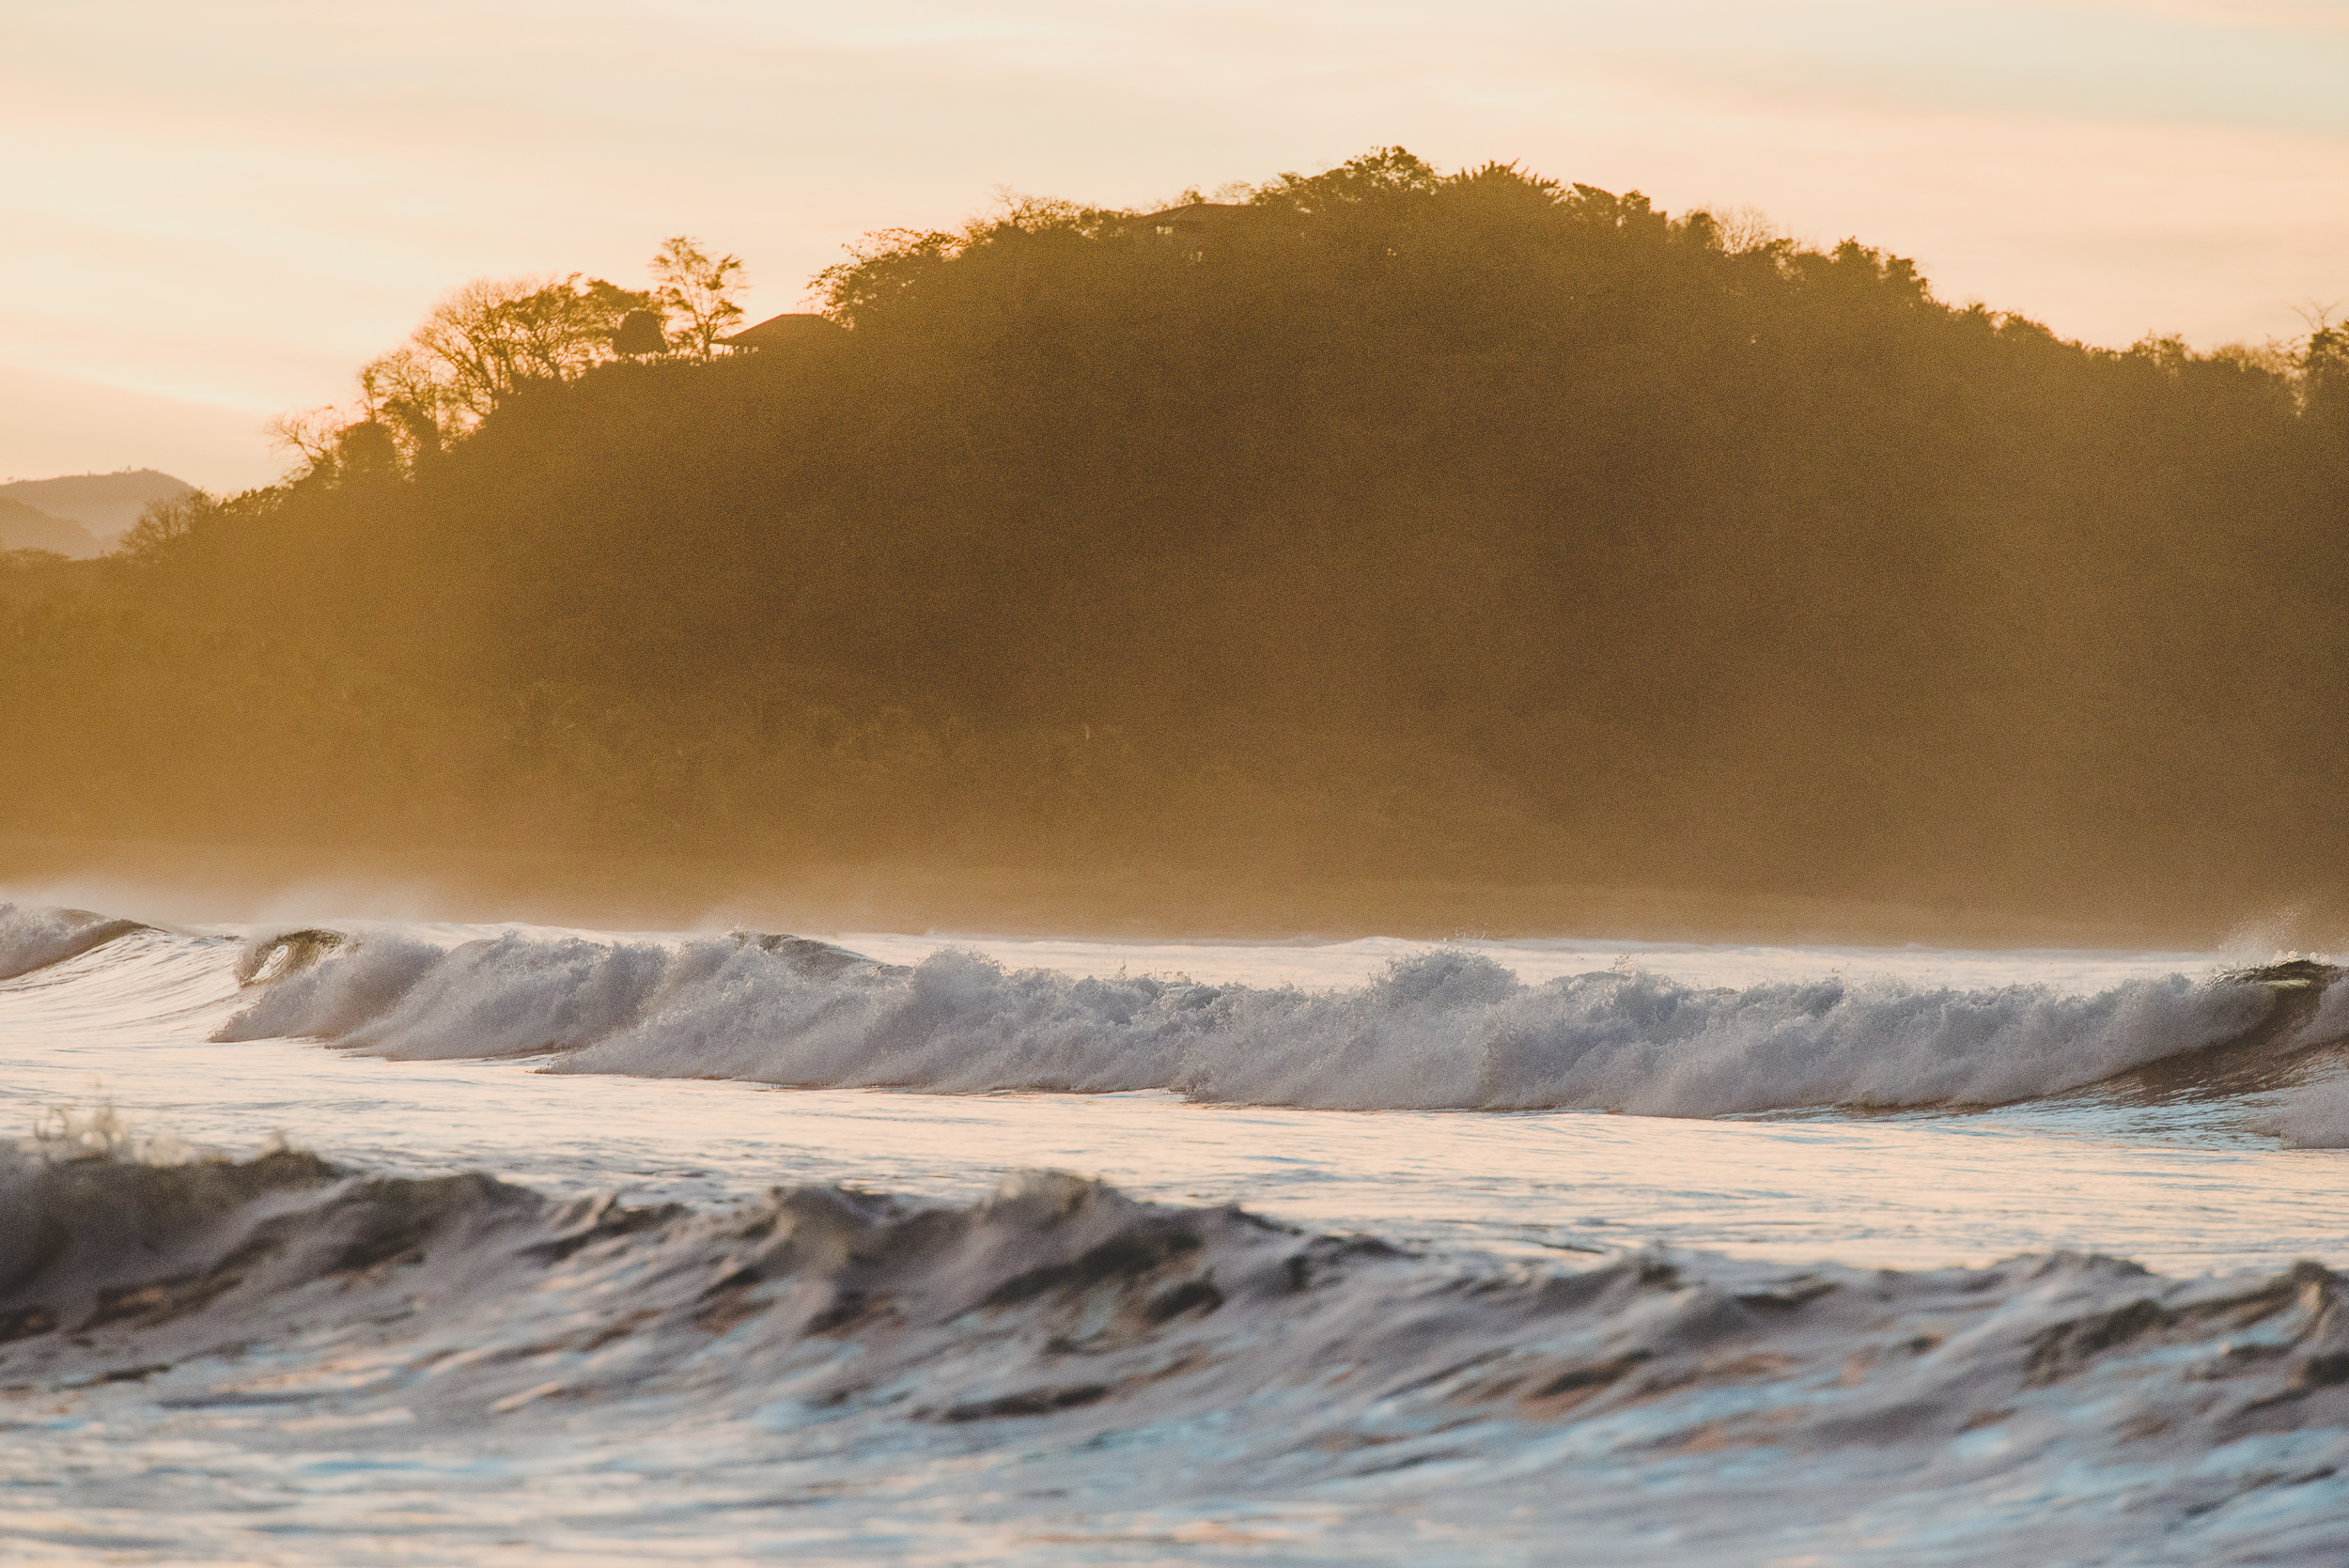 Costa Rican Waves at Sunrise